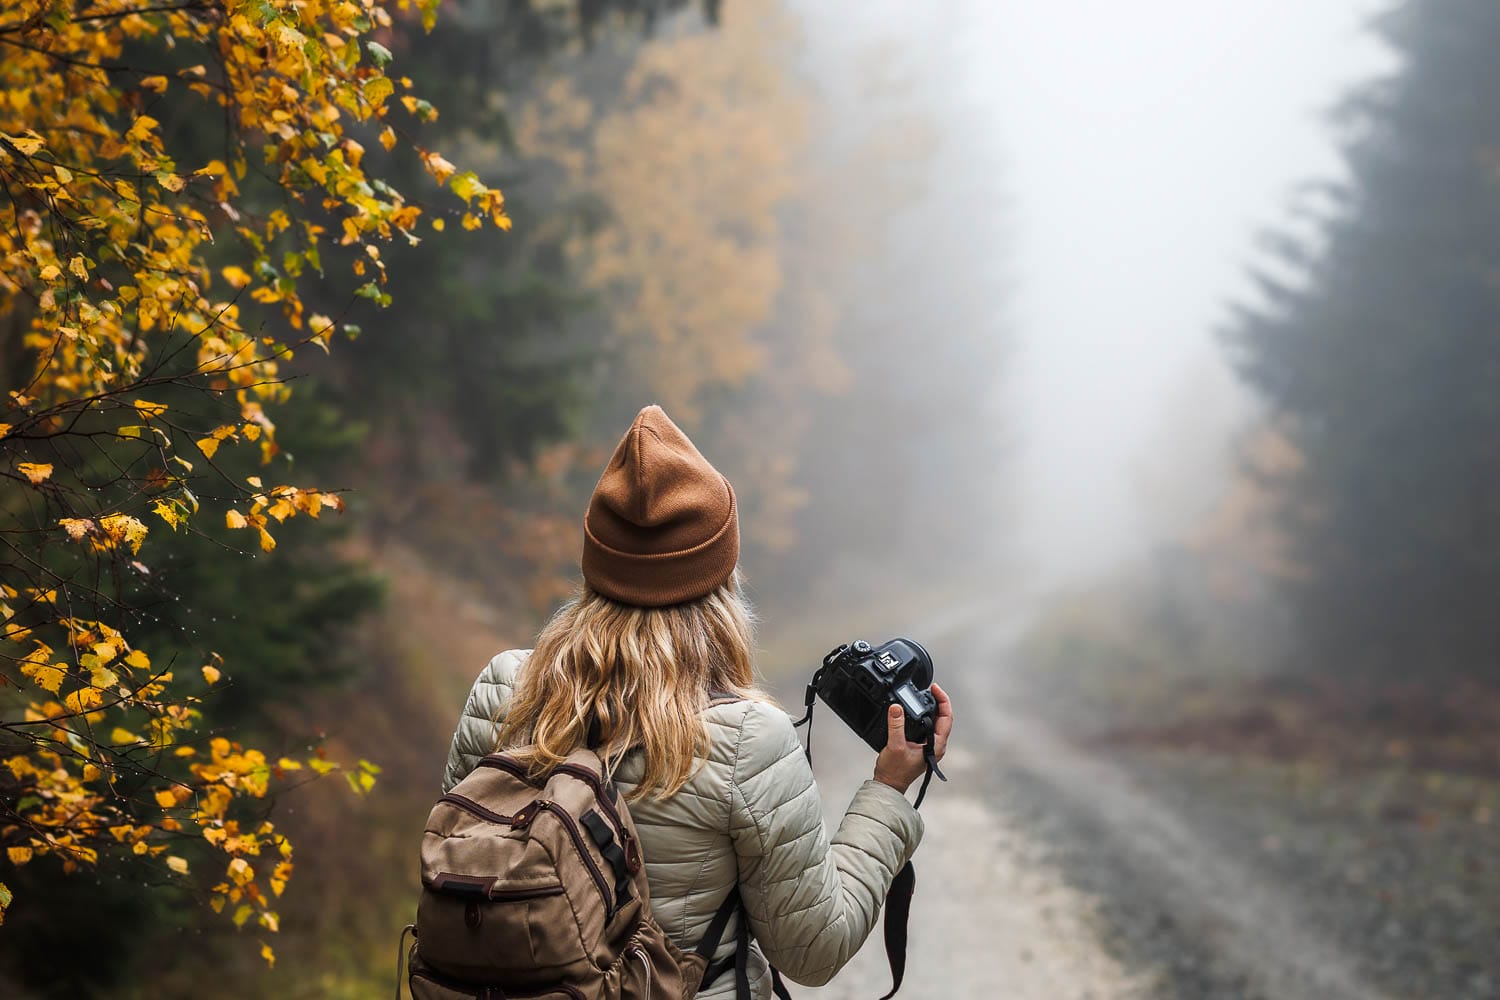 Woman with camera standing on a foggy forest road surrounded by autumn foliage.